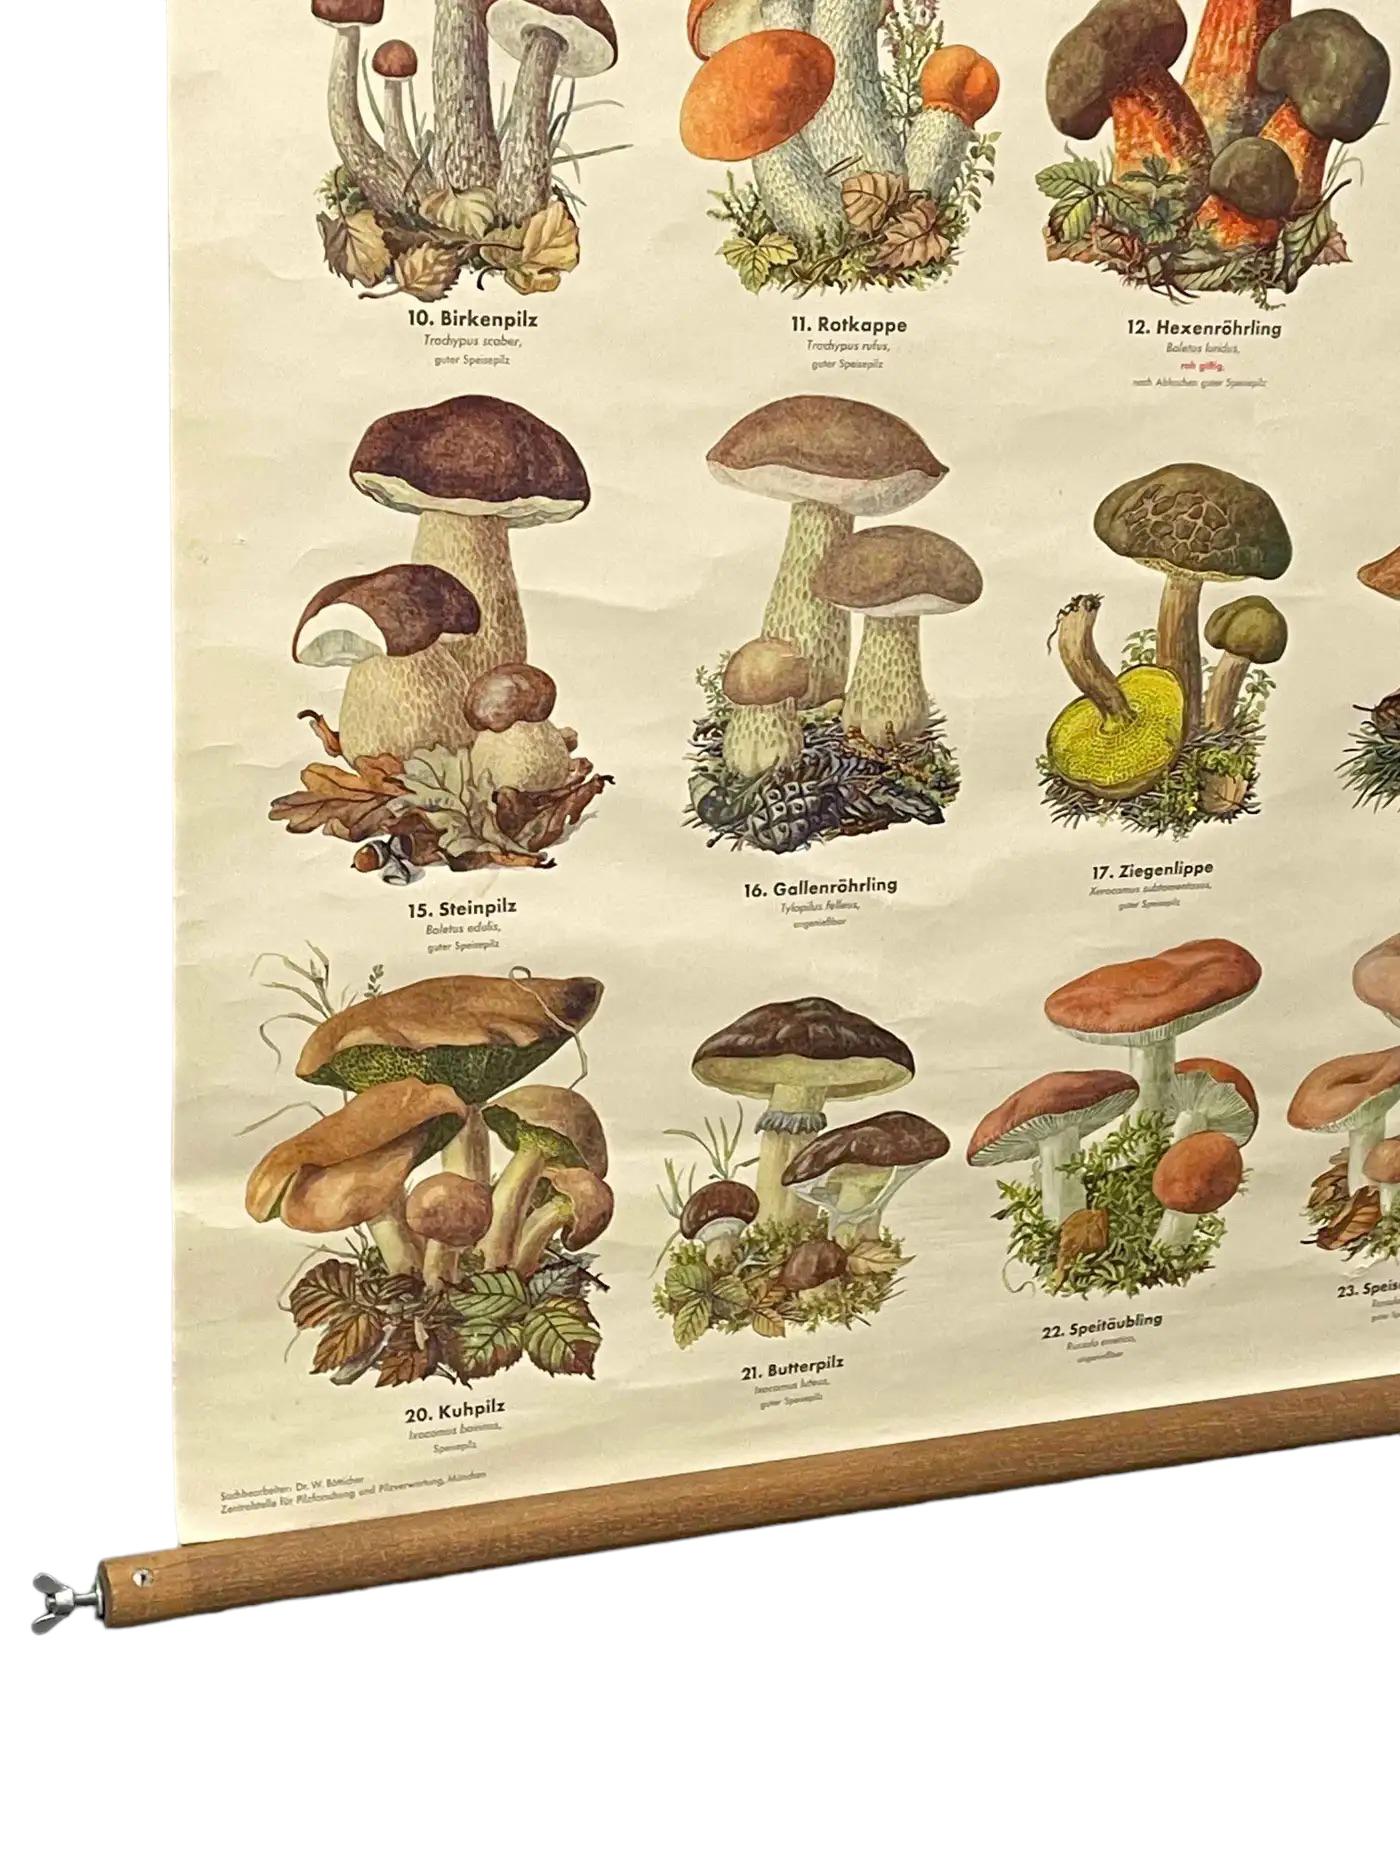 Mushrooms of Europe Rollable Poster Print Wall Chart, Austria 1950s 3